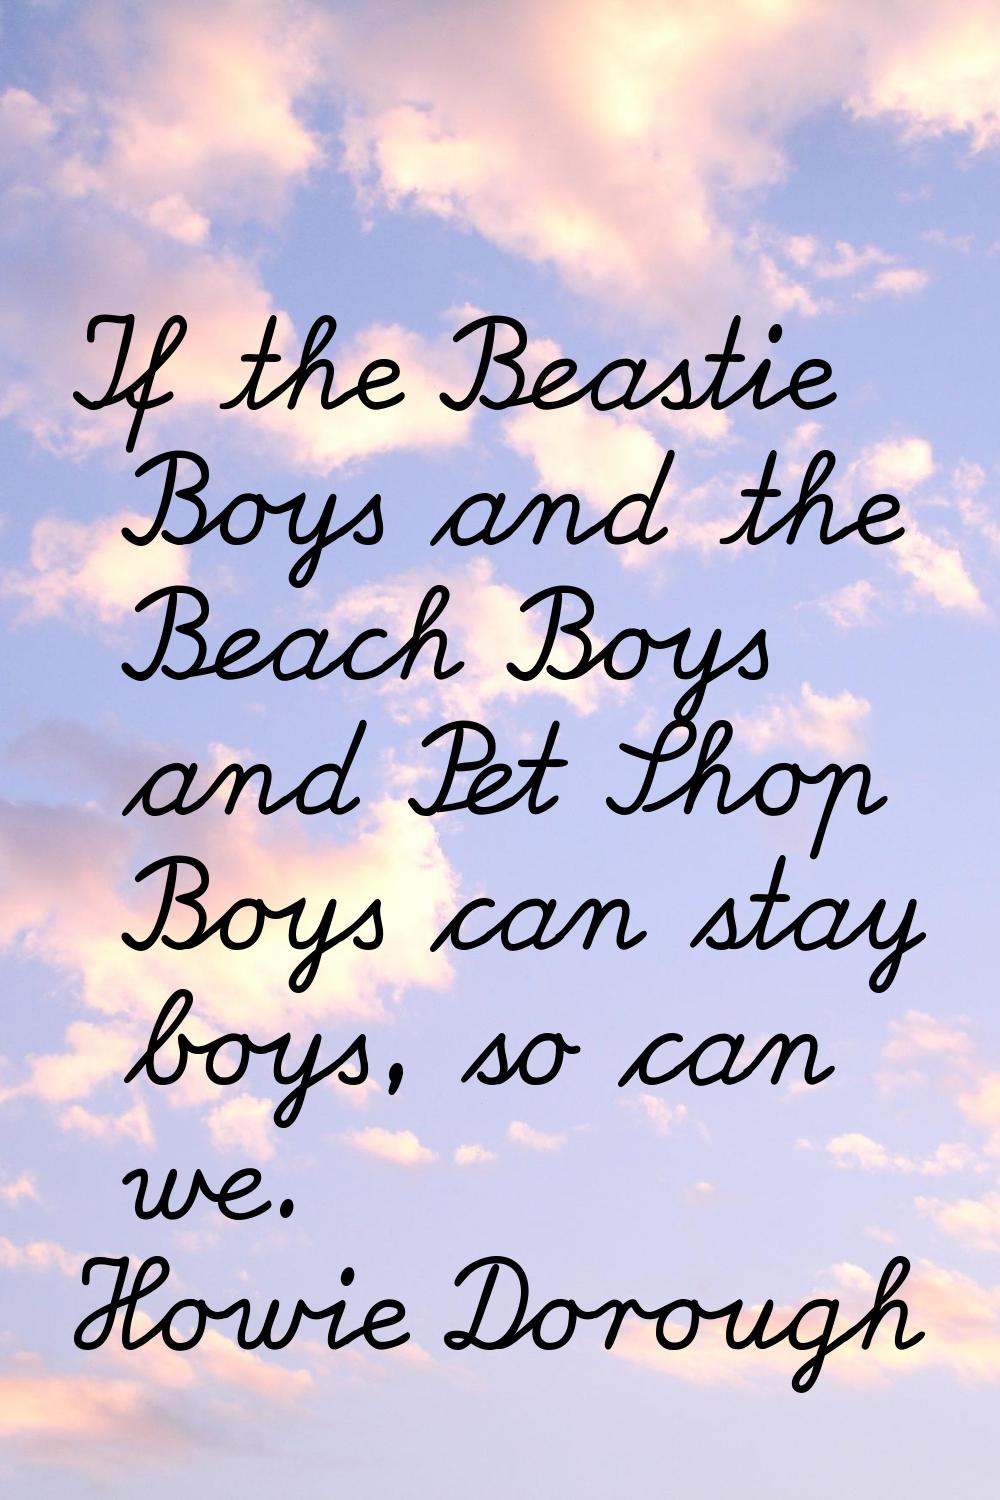 If the Beastie Boys and the Beach Boys and Pet Shop Boys can stay boys, so can we.